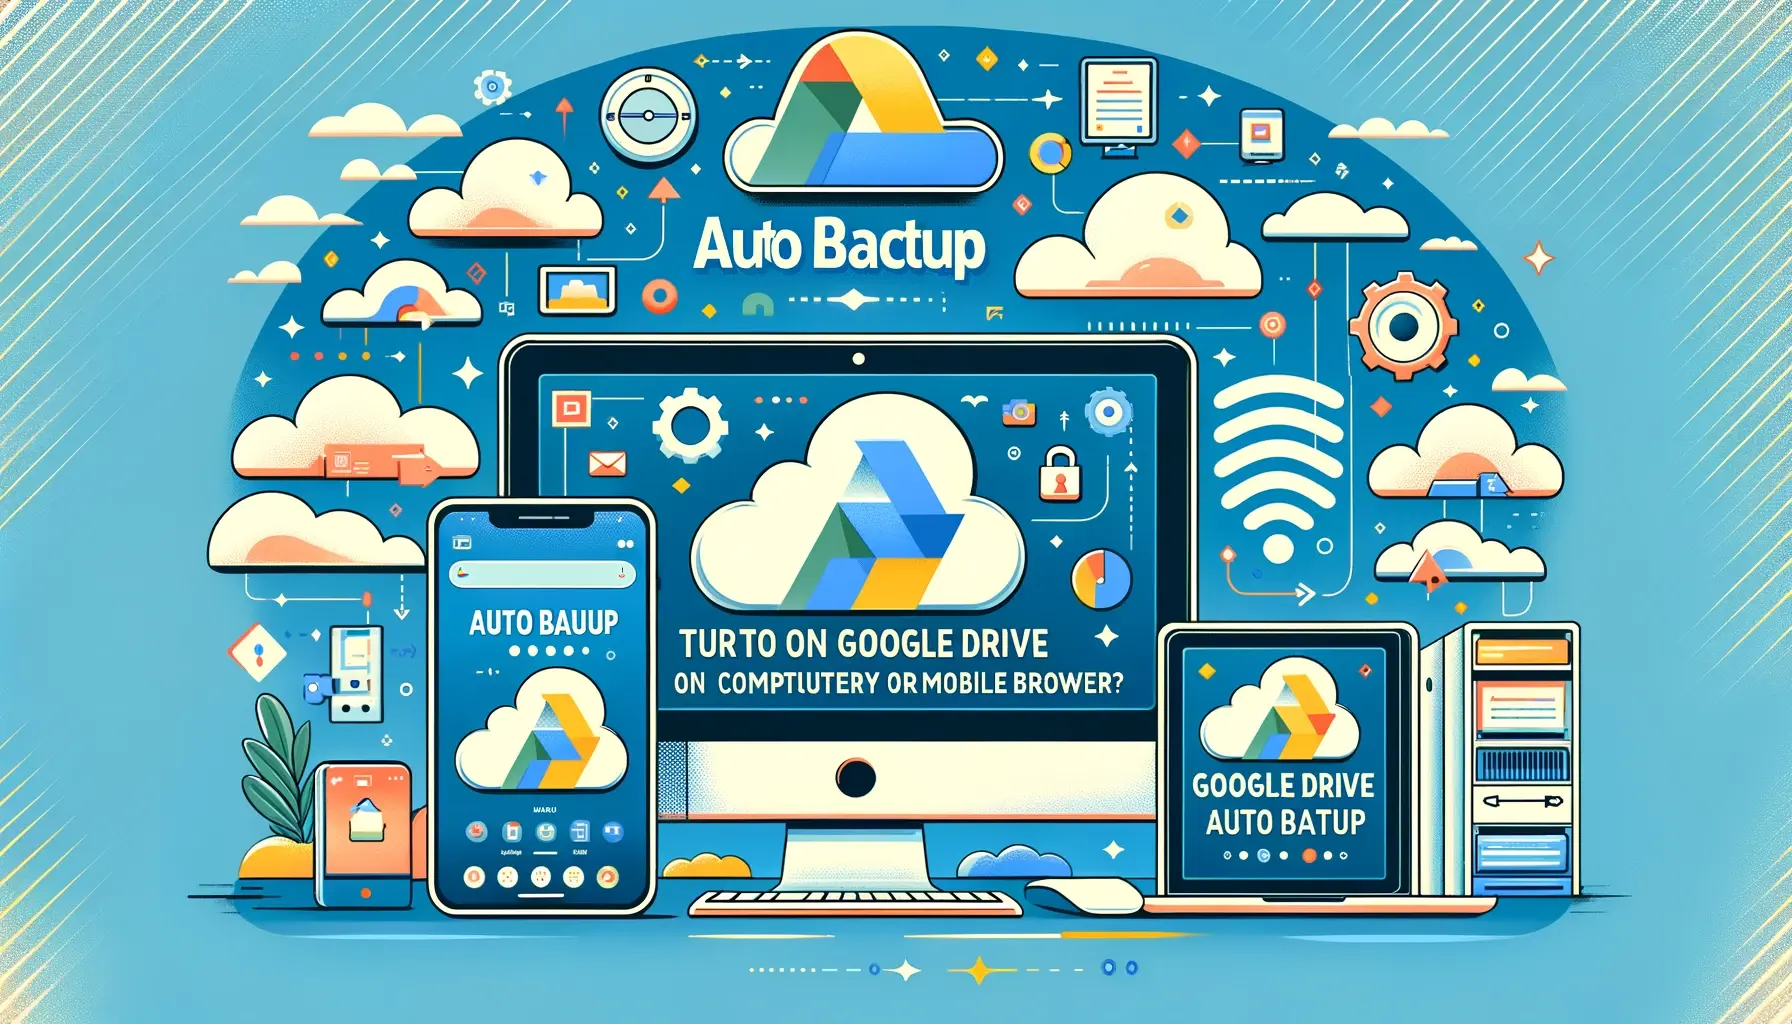 How to Turn ON Google Drive Auto Backup on Computer or Mobile Browser?